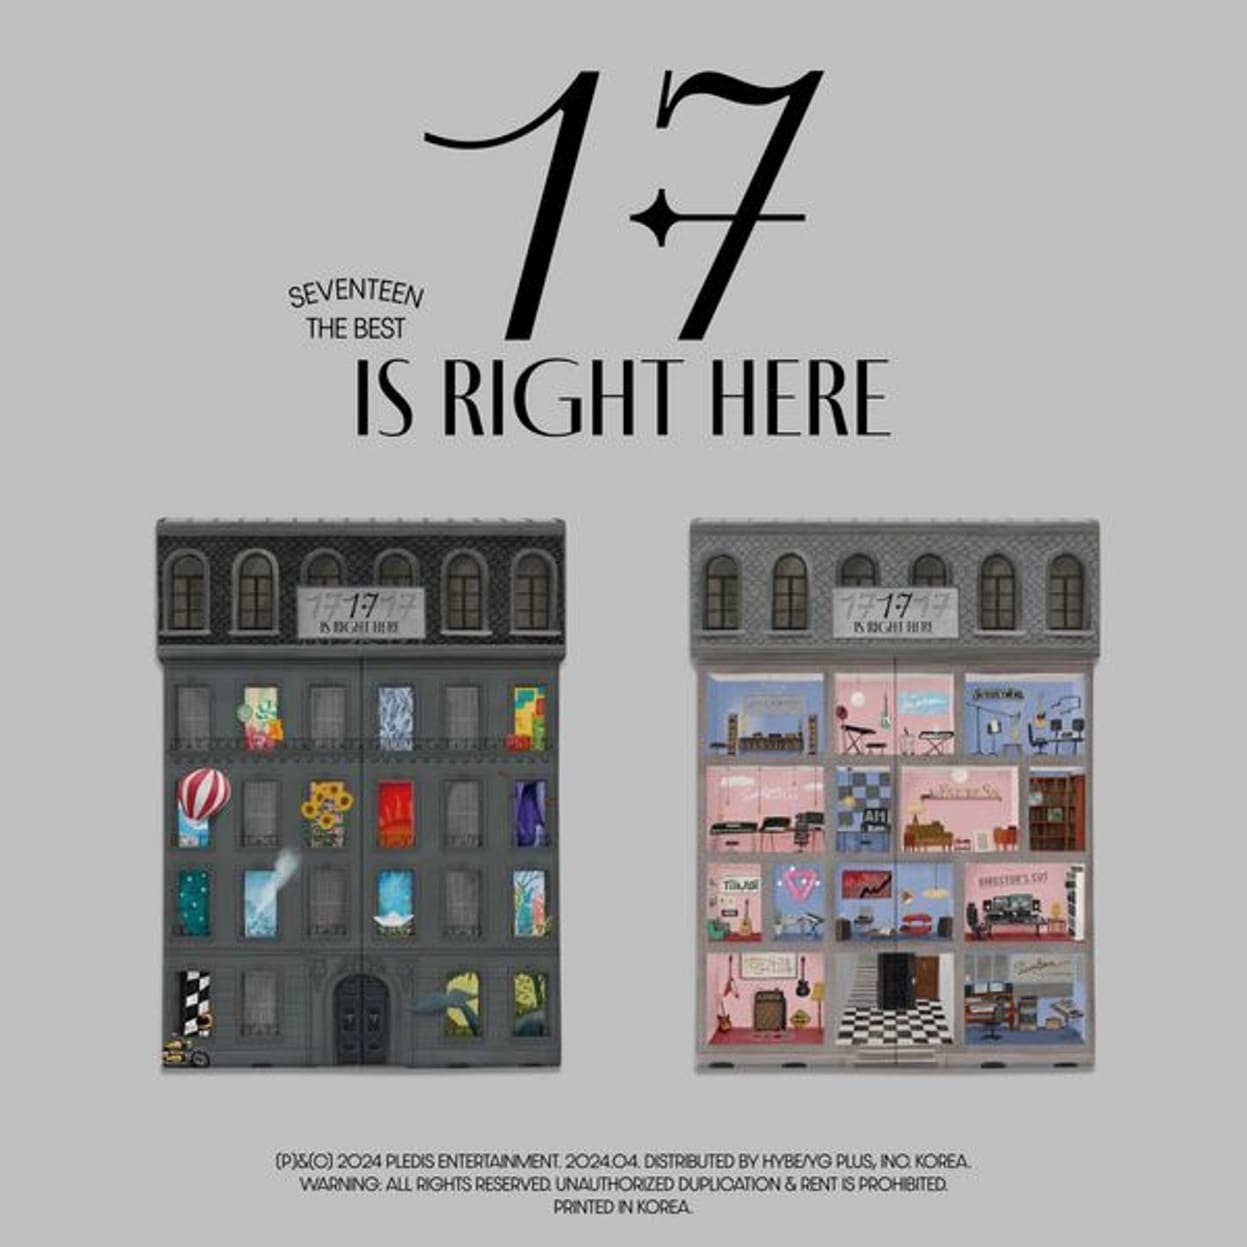 (2 sets) SEVENTEEN - Best Album [17 IS RIGHT HERE]